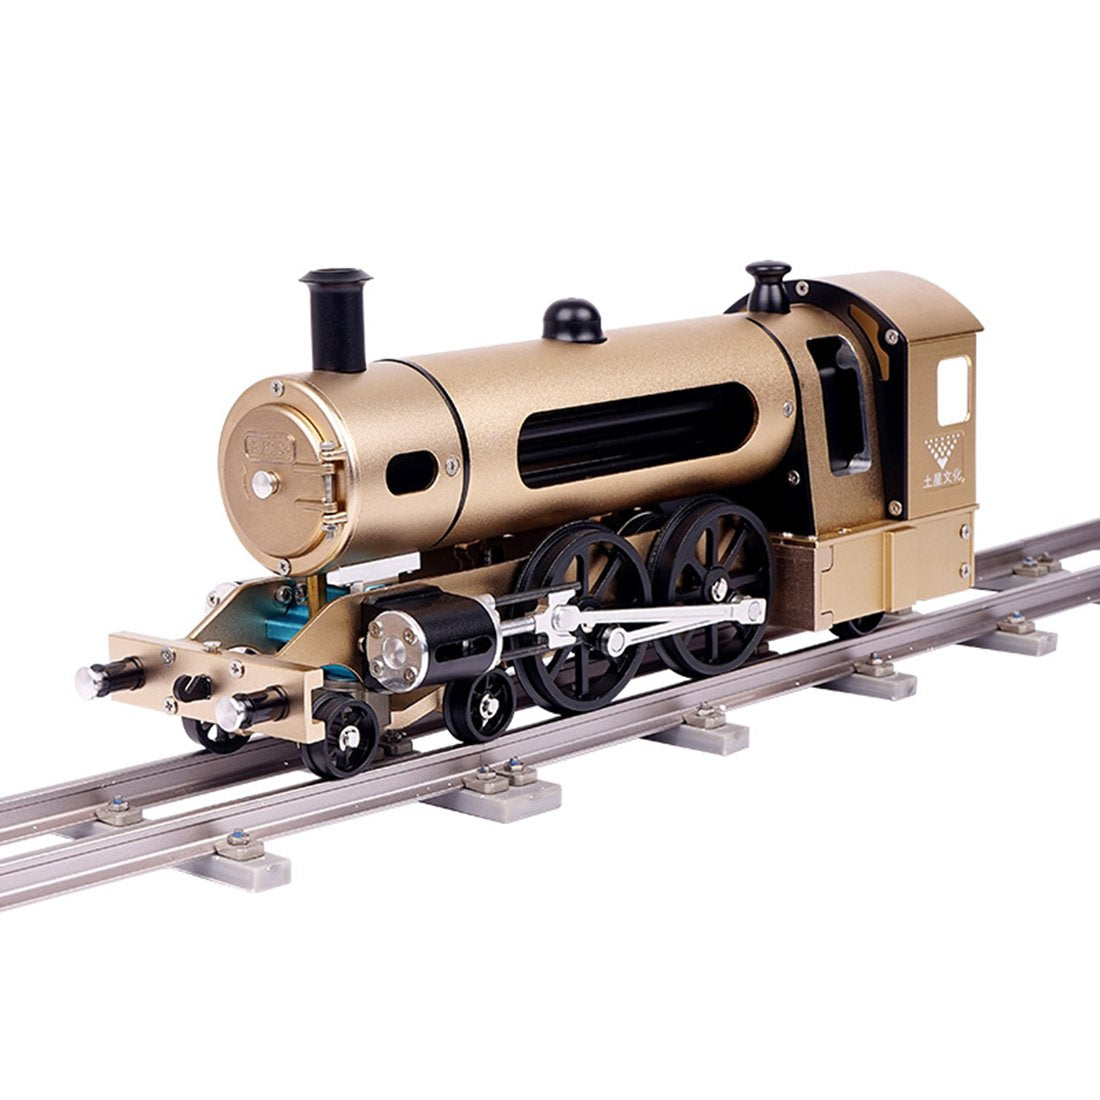 Teching Assembly Electric Steam Locomotive Train Model Toy Gifts for Adult